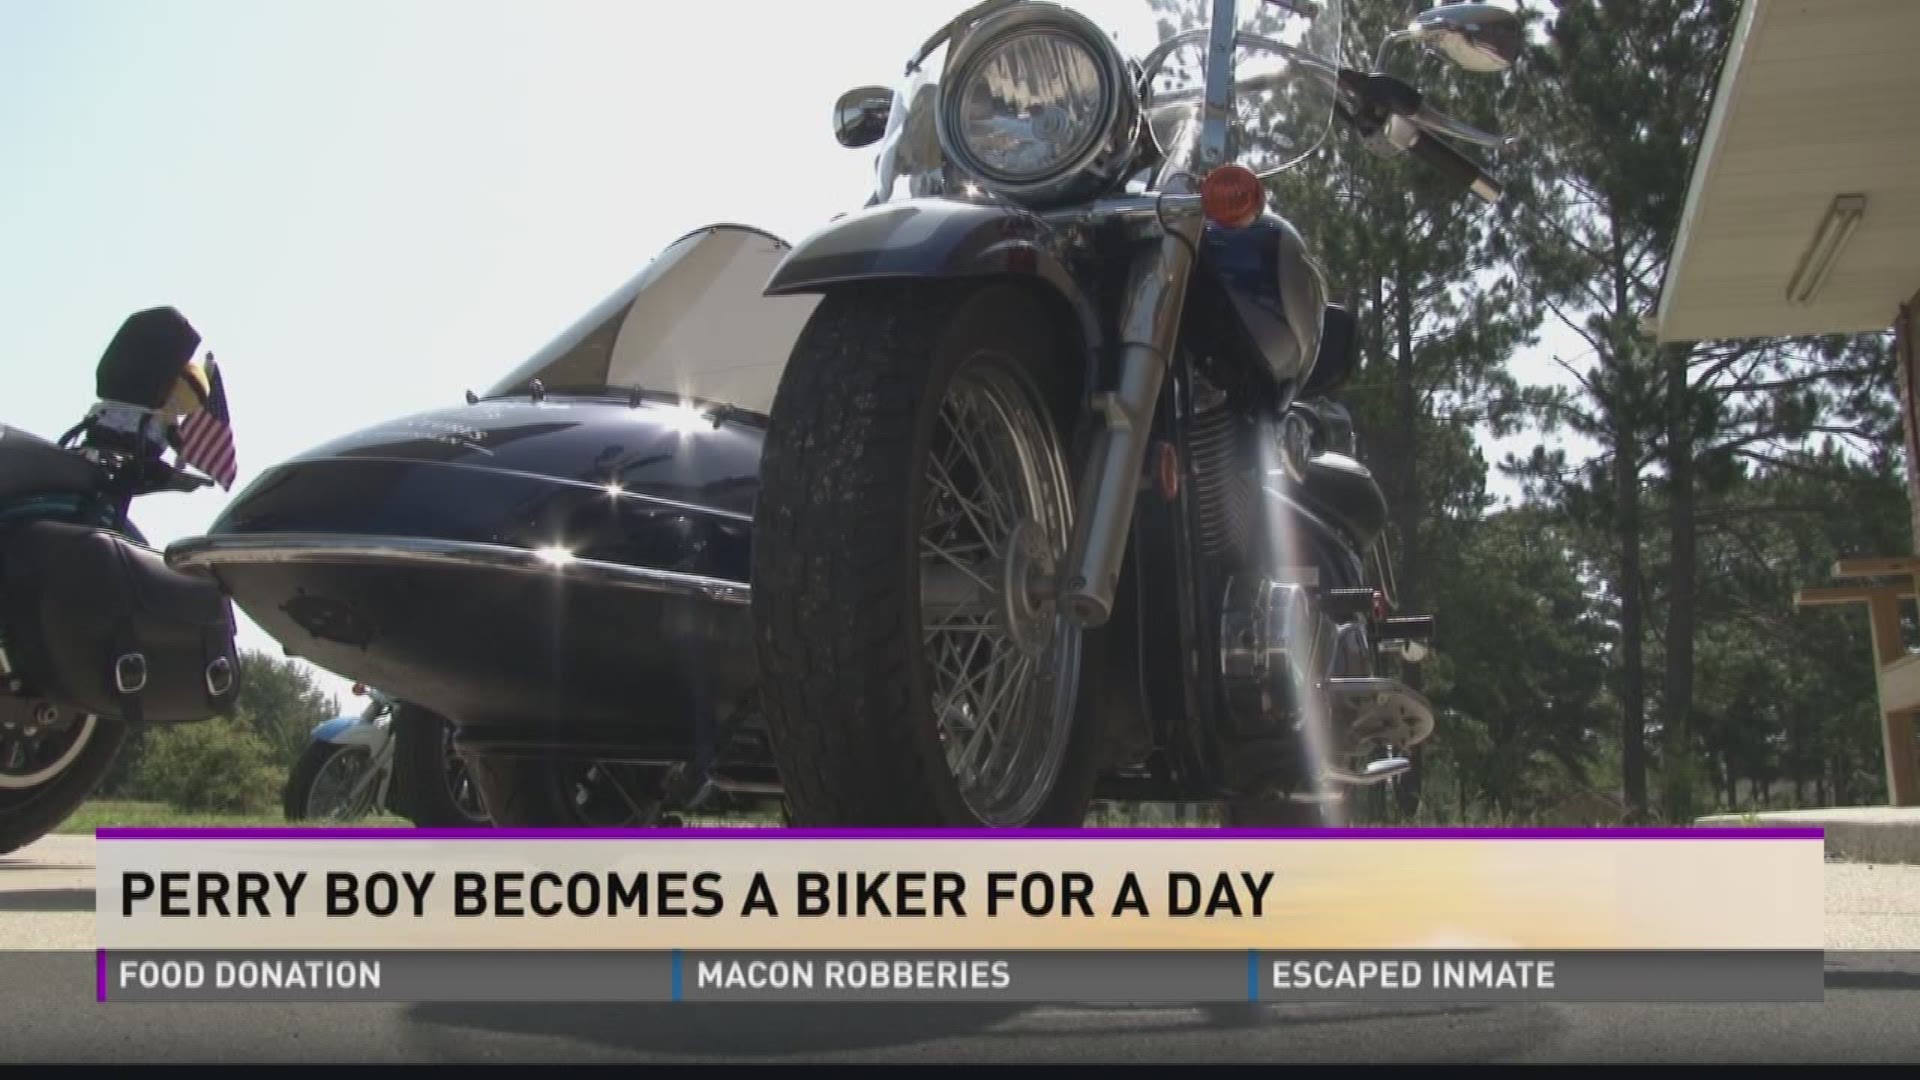 Perry boy becomes biker for a day